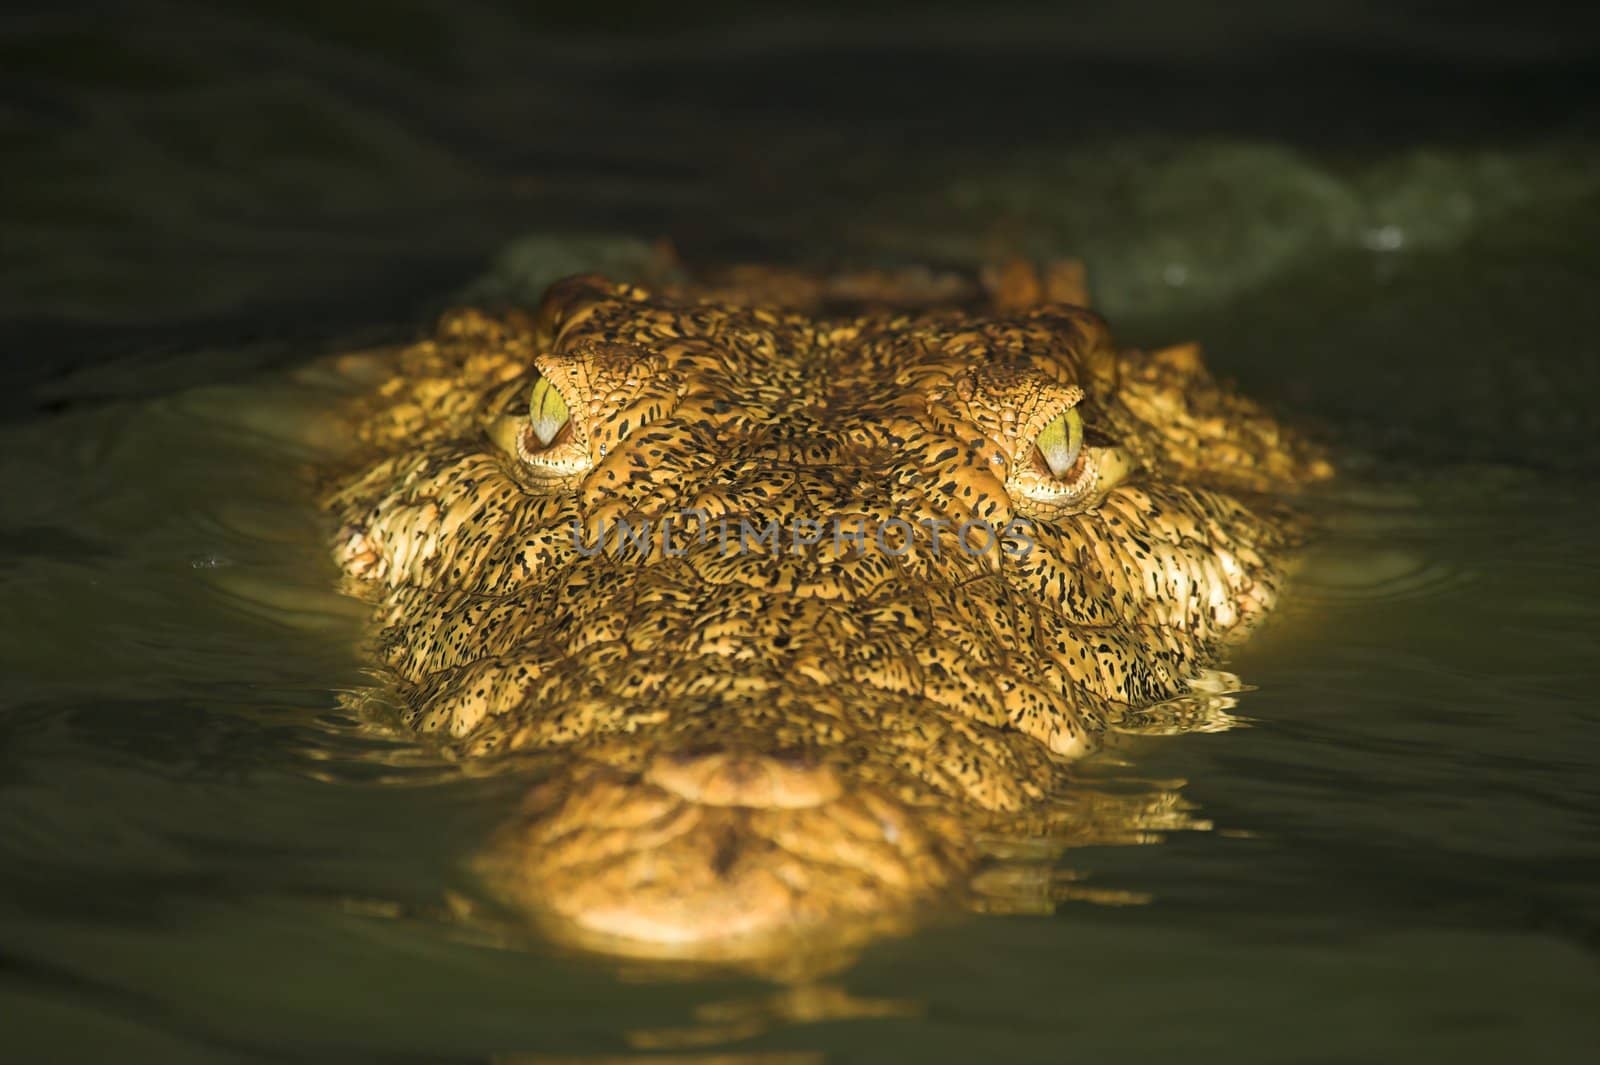 Close up of a crocodile in the water by nightowlza